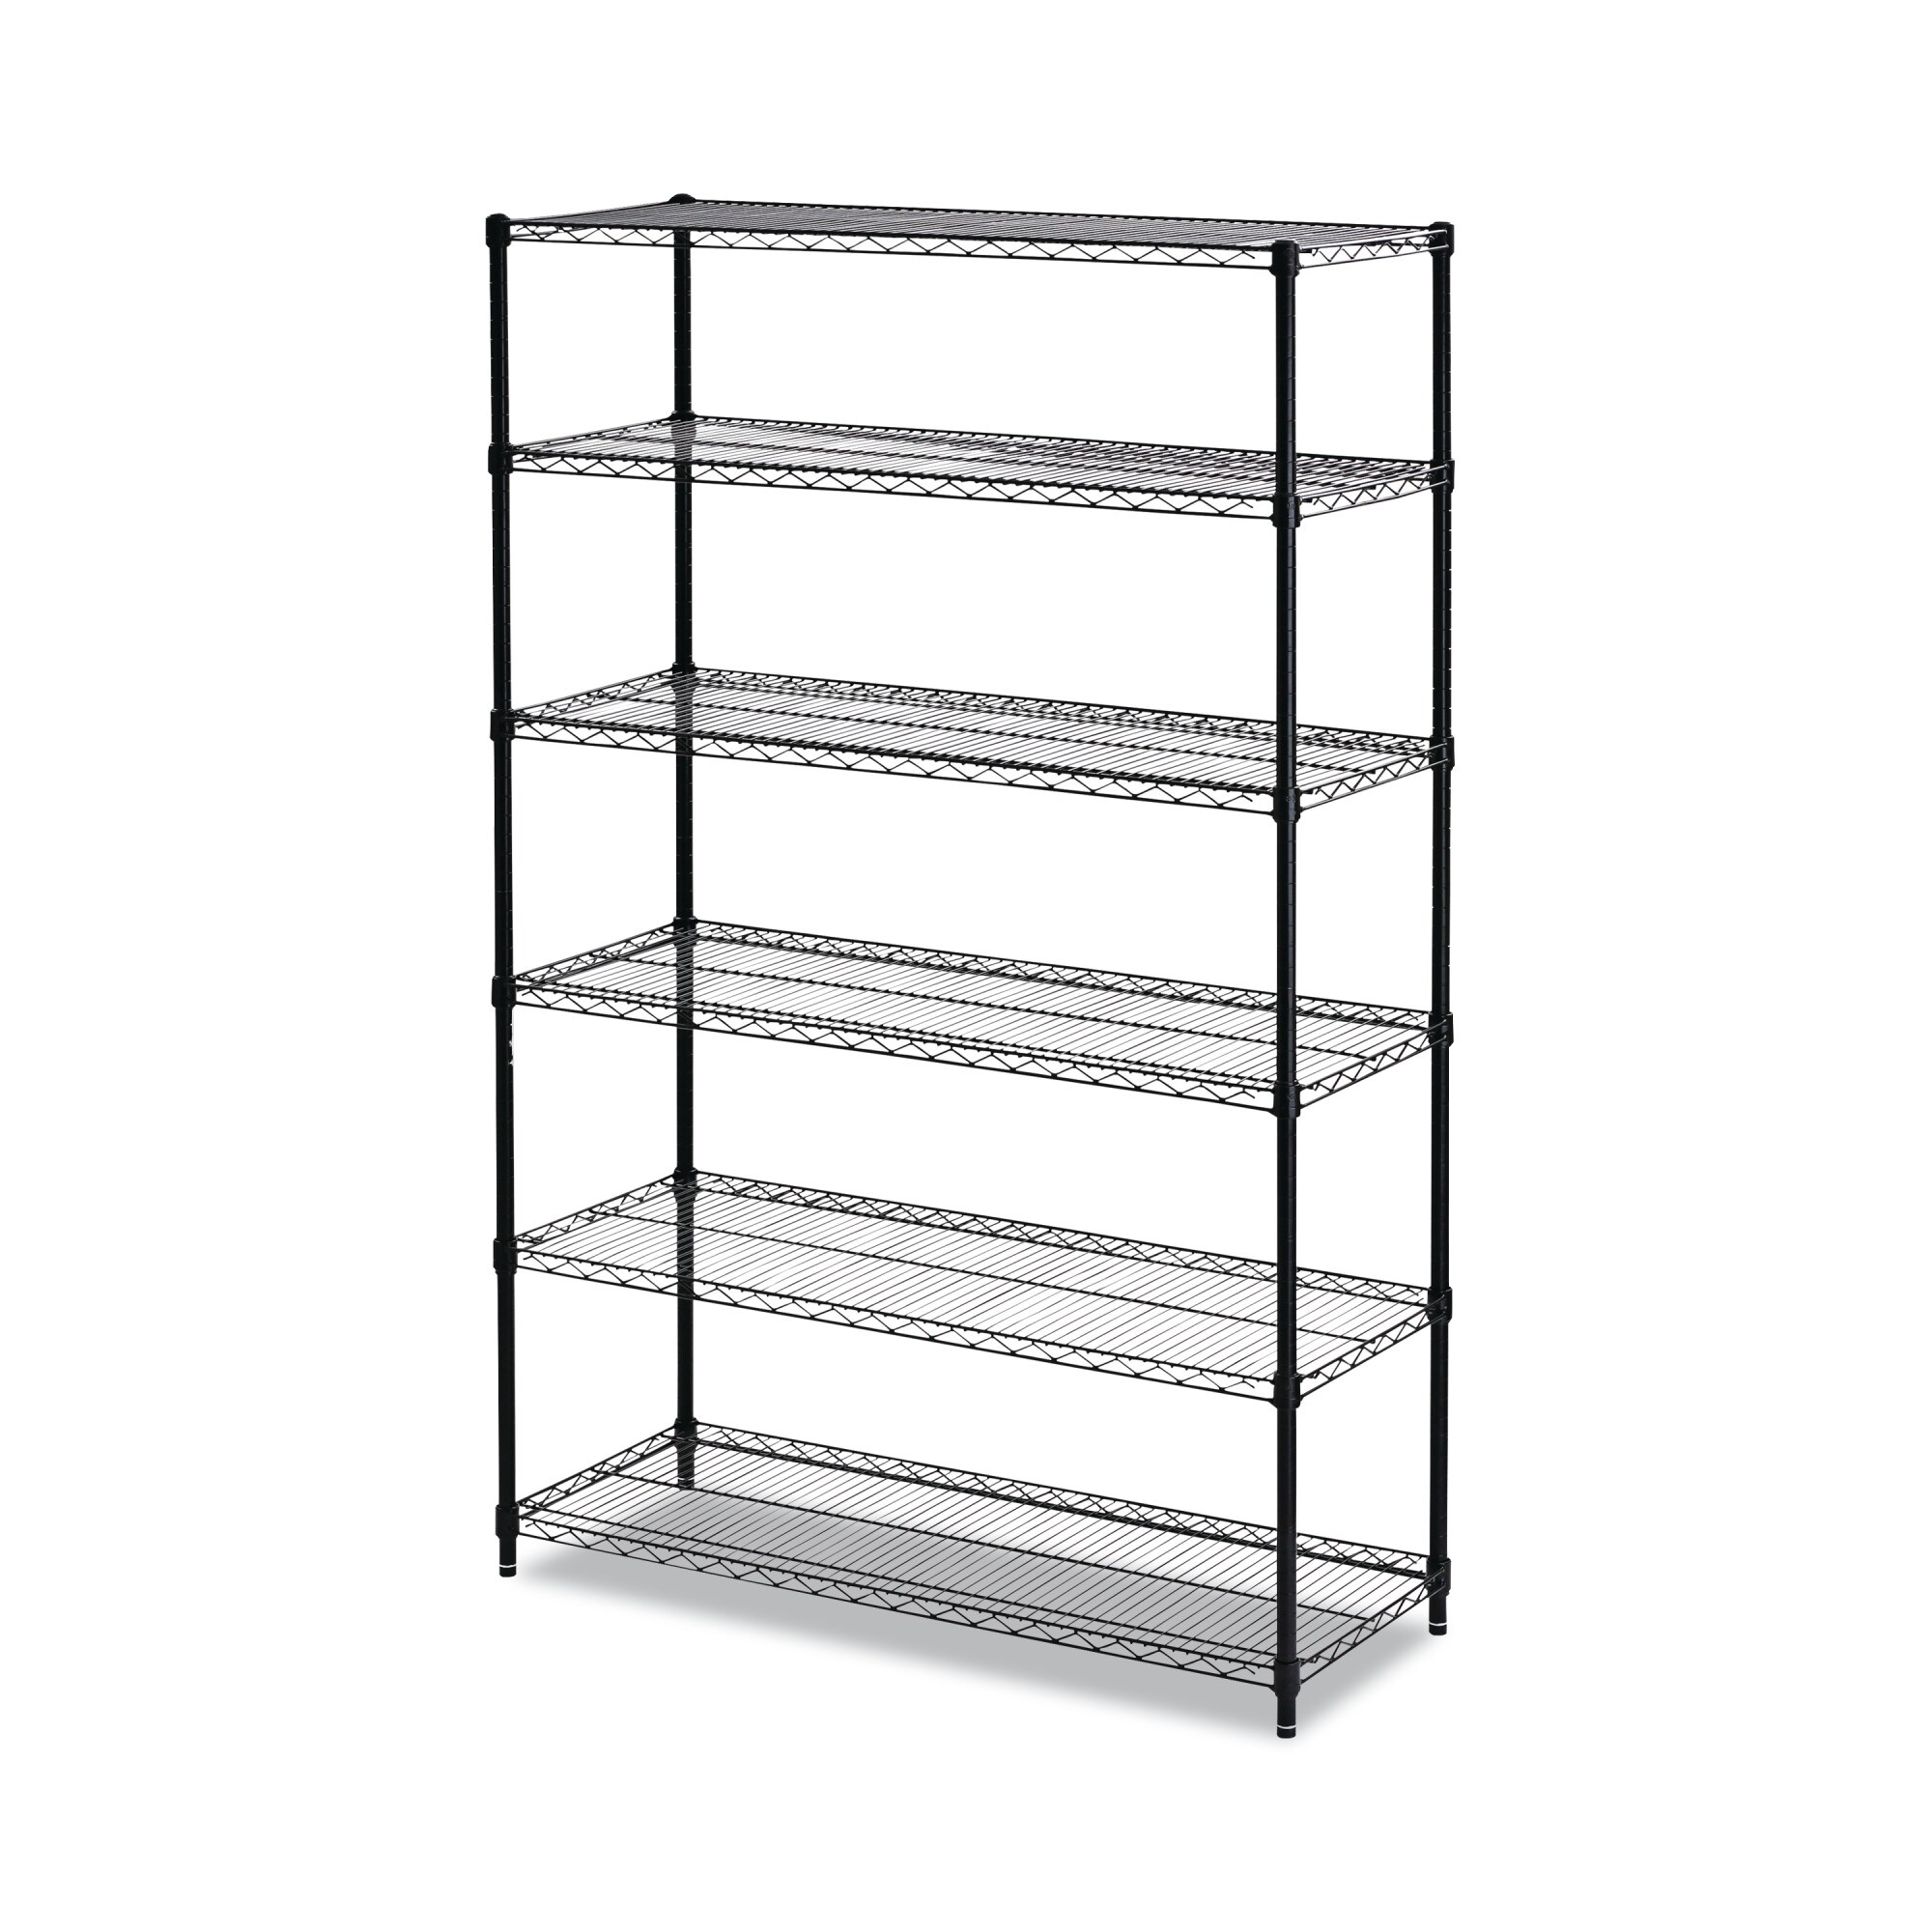 Alera 48 W x 18 D Shelf Liners for Wire Shelving in Clear